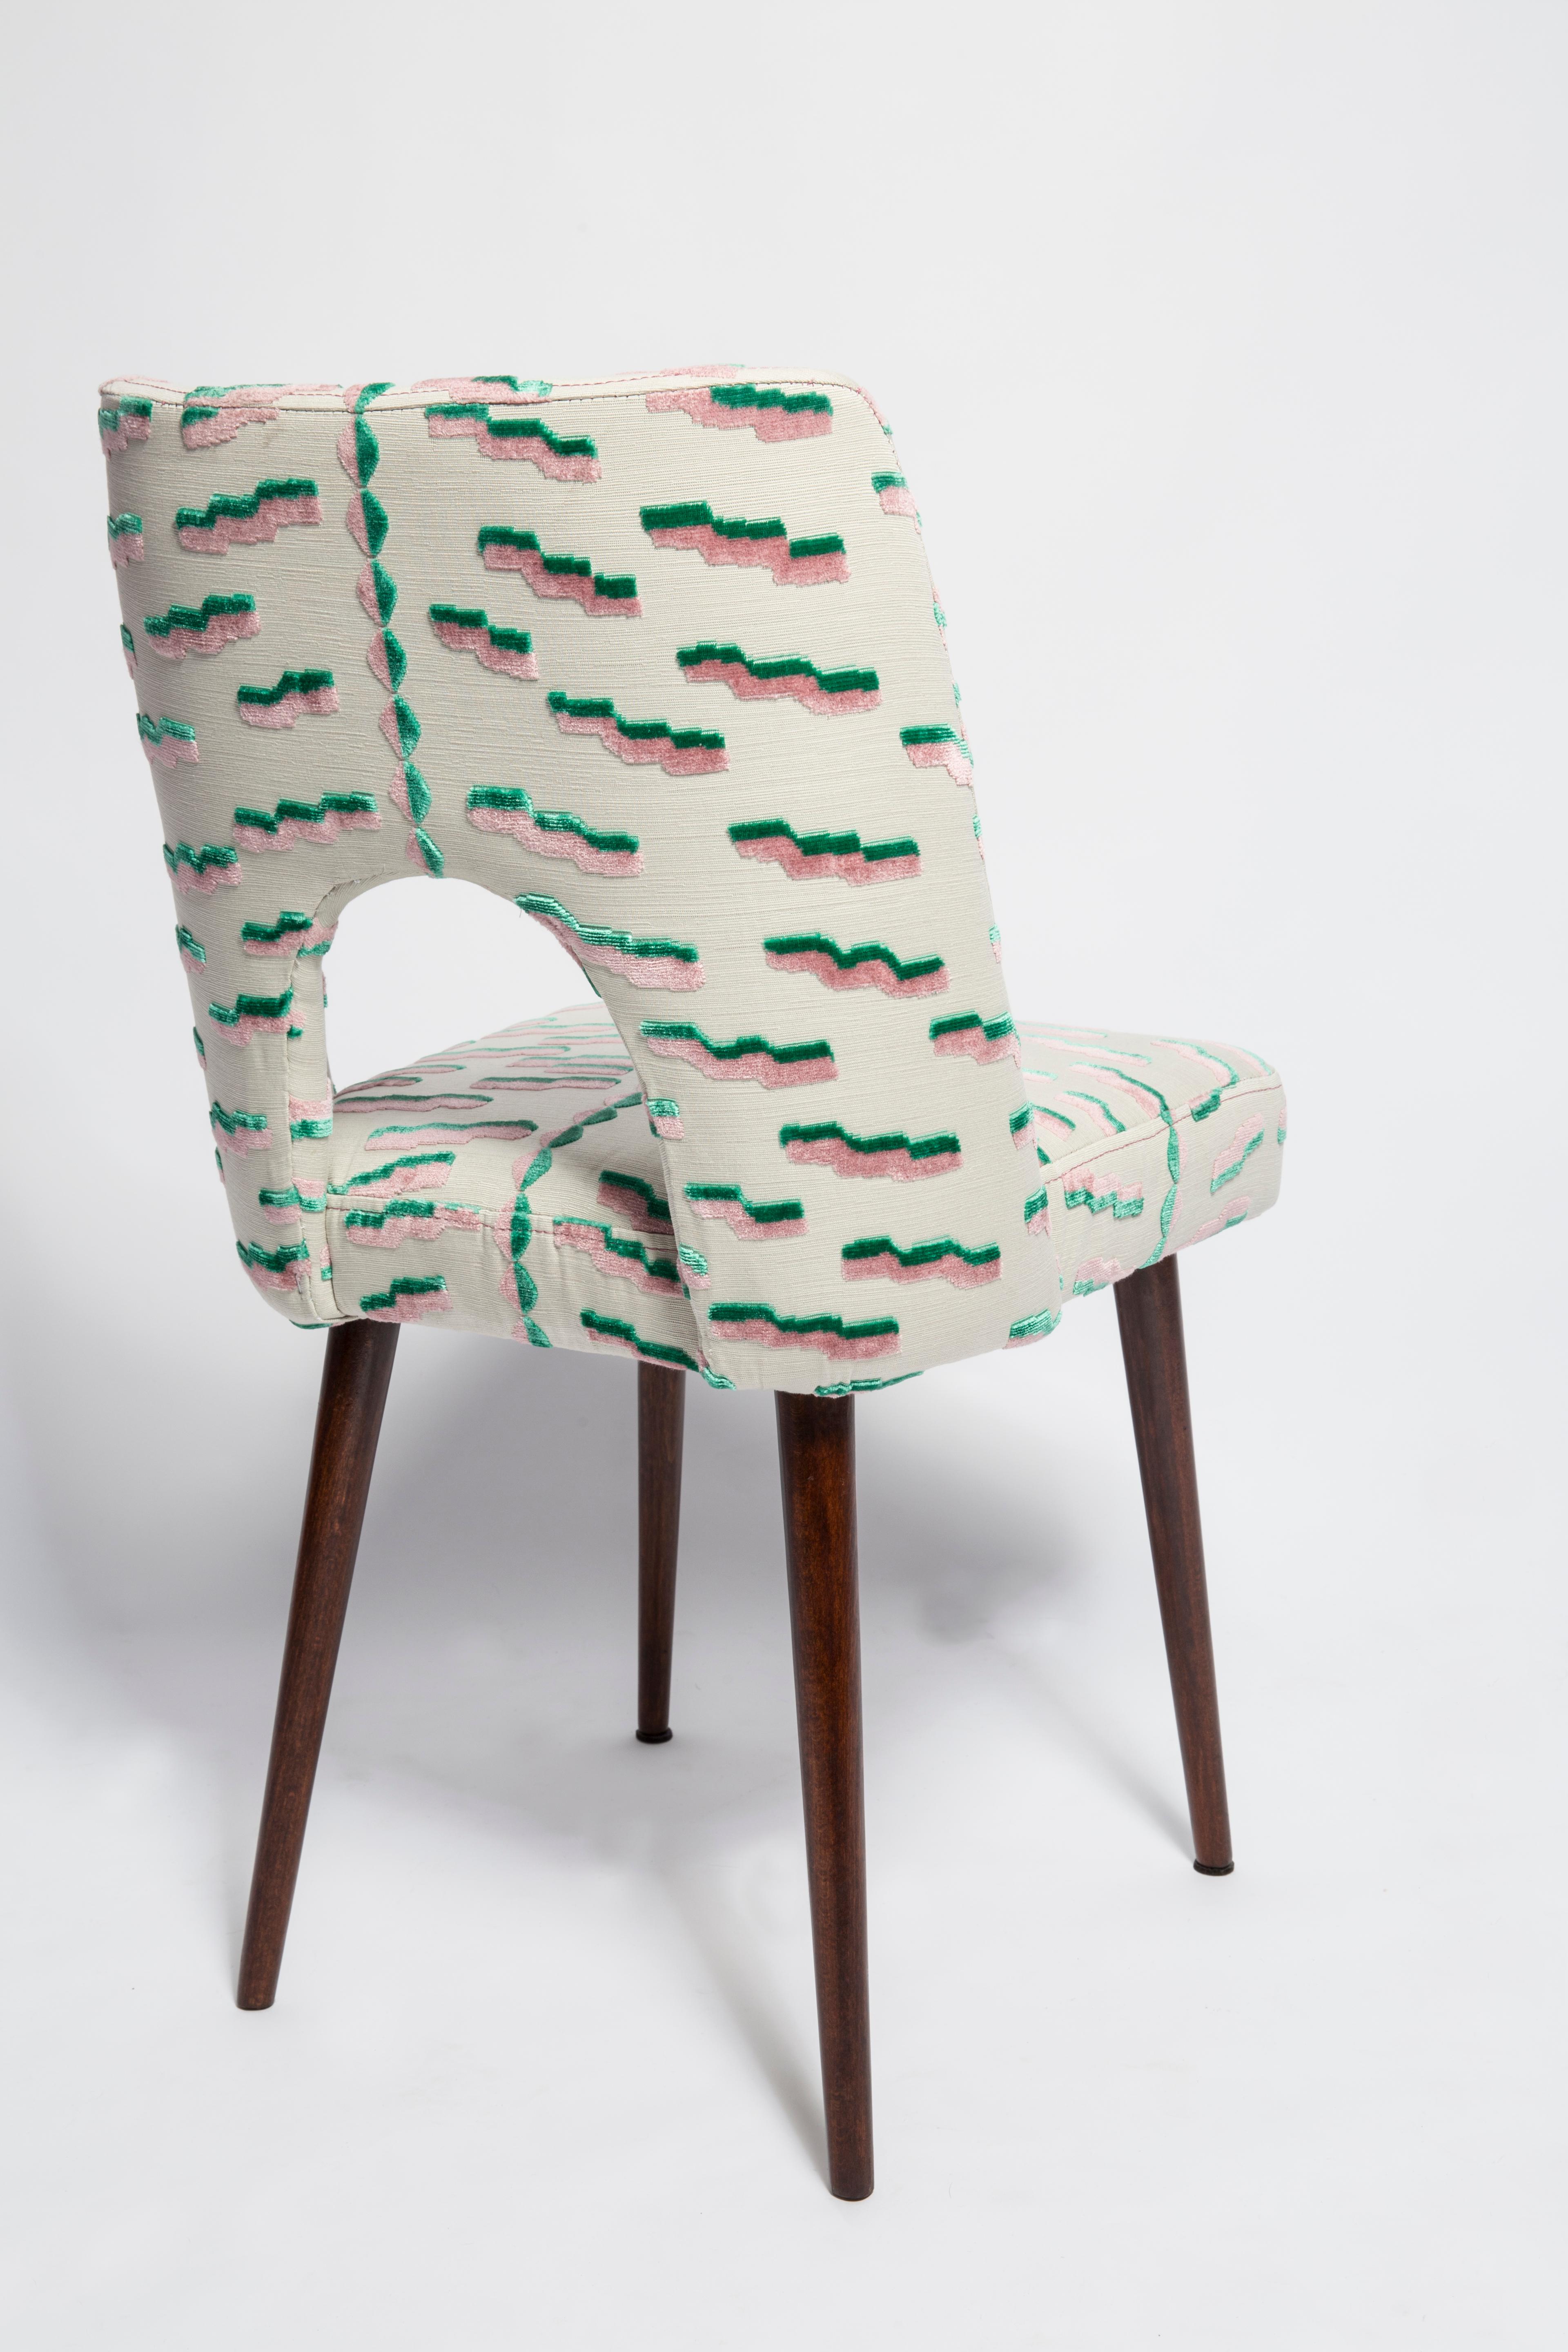 Polish Mid Century Pink and Green Tiger Beat Jacquard Velvet Shell Chair, Europe, 1960s For Sale